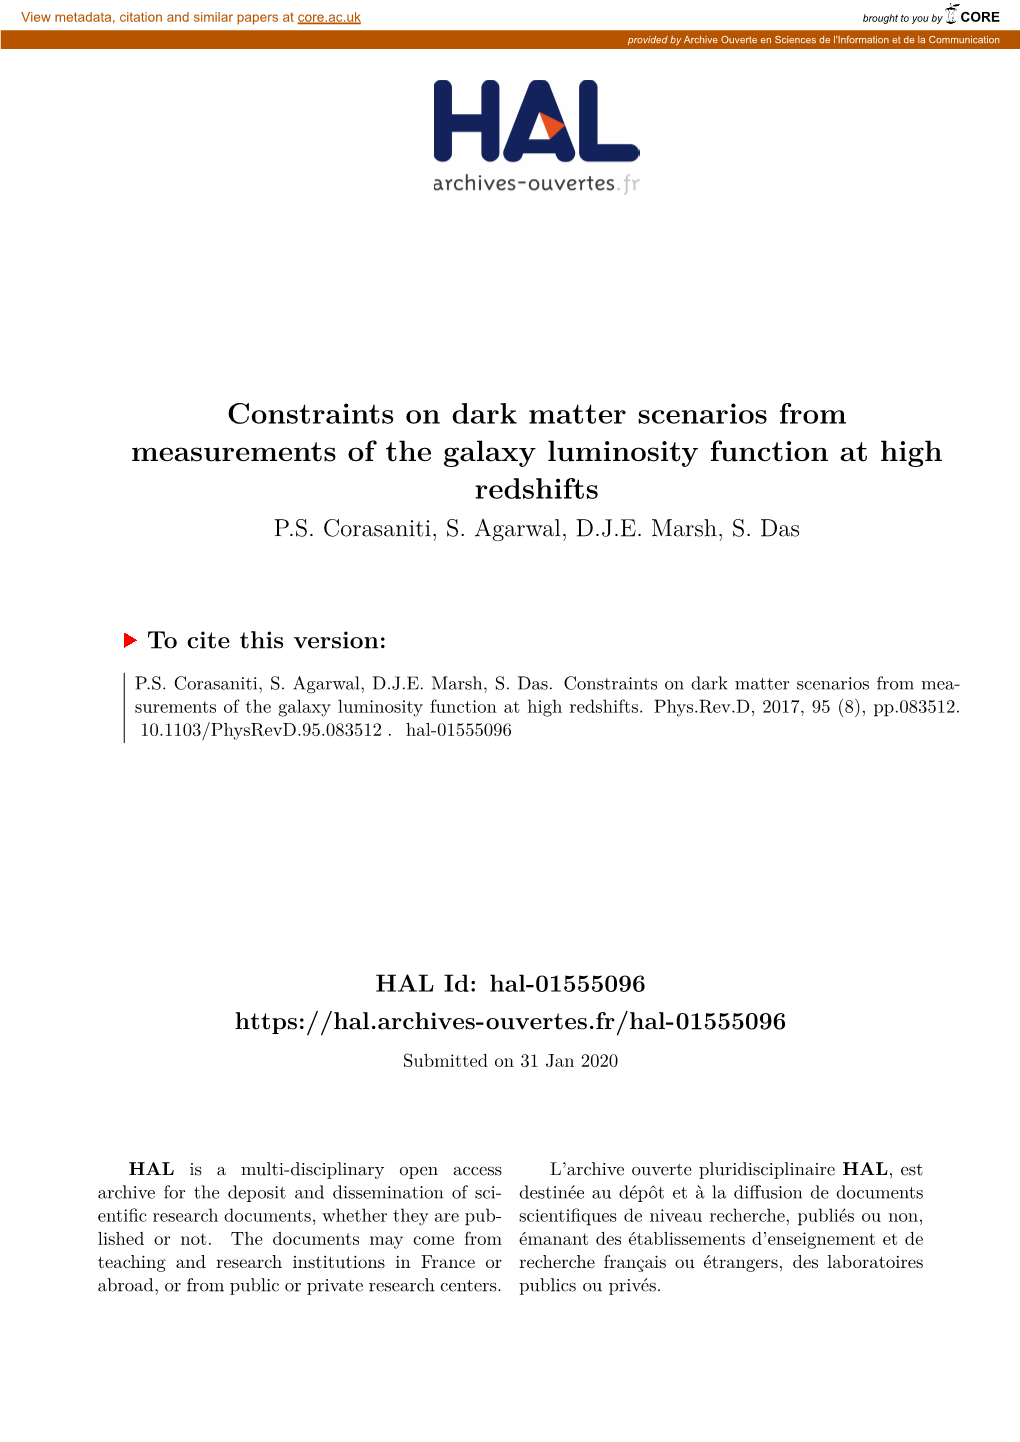 Constraints on Dark Matter Scenarios from Measurements of the Galaxy Luminosity Function at High Redshifts P.S